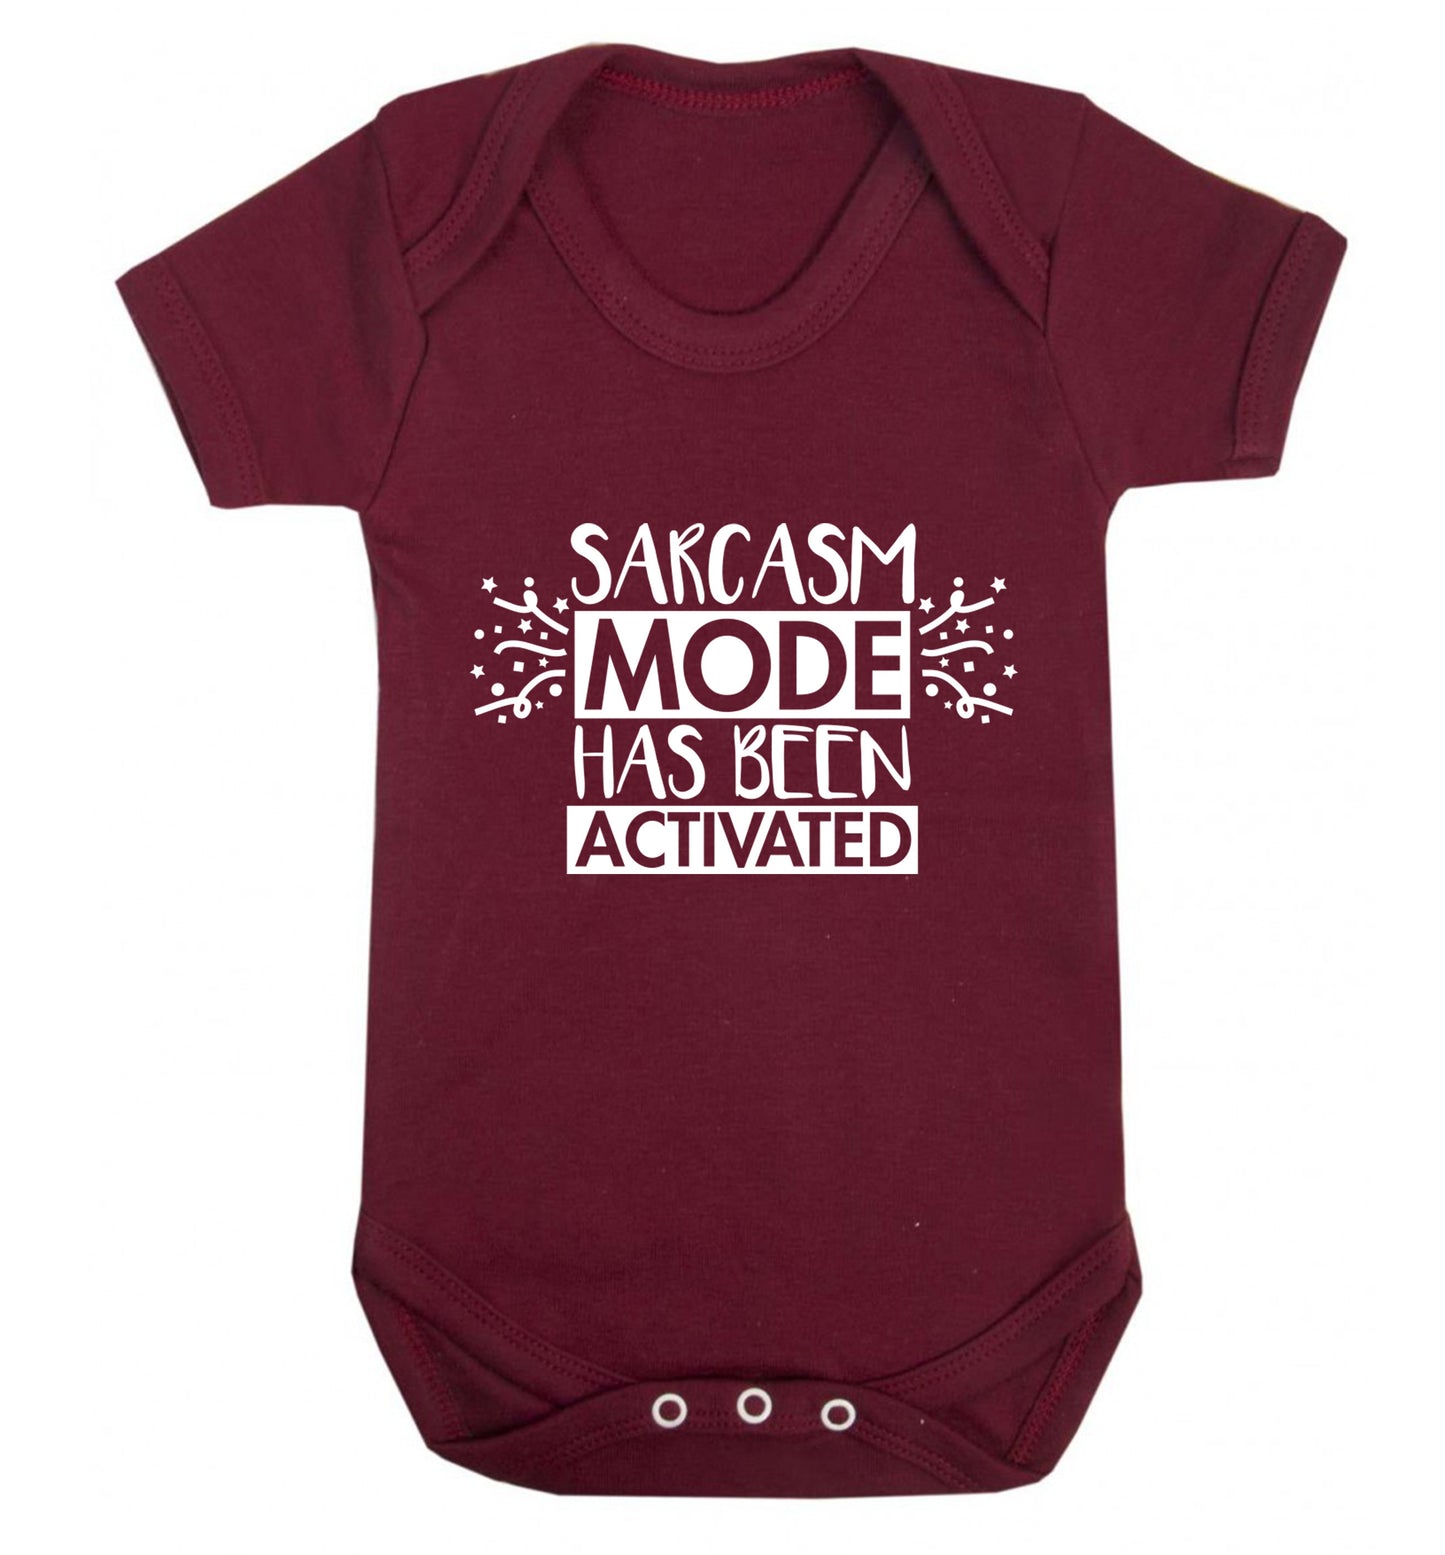 Sarcarsm mode has been activated Baby Vest maroon 18-24 months